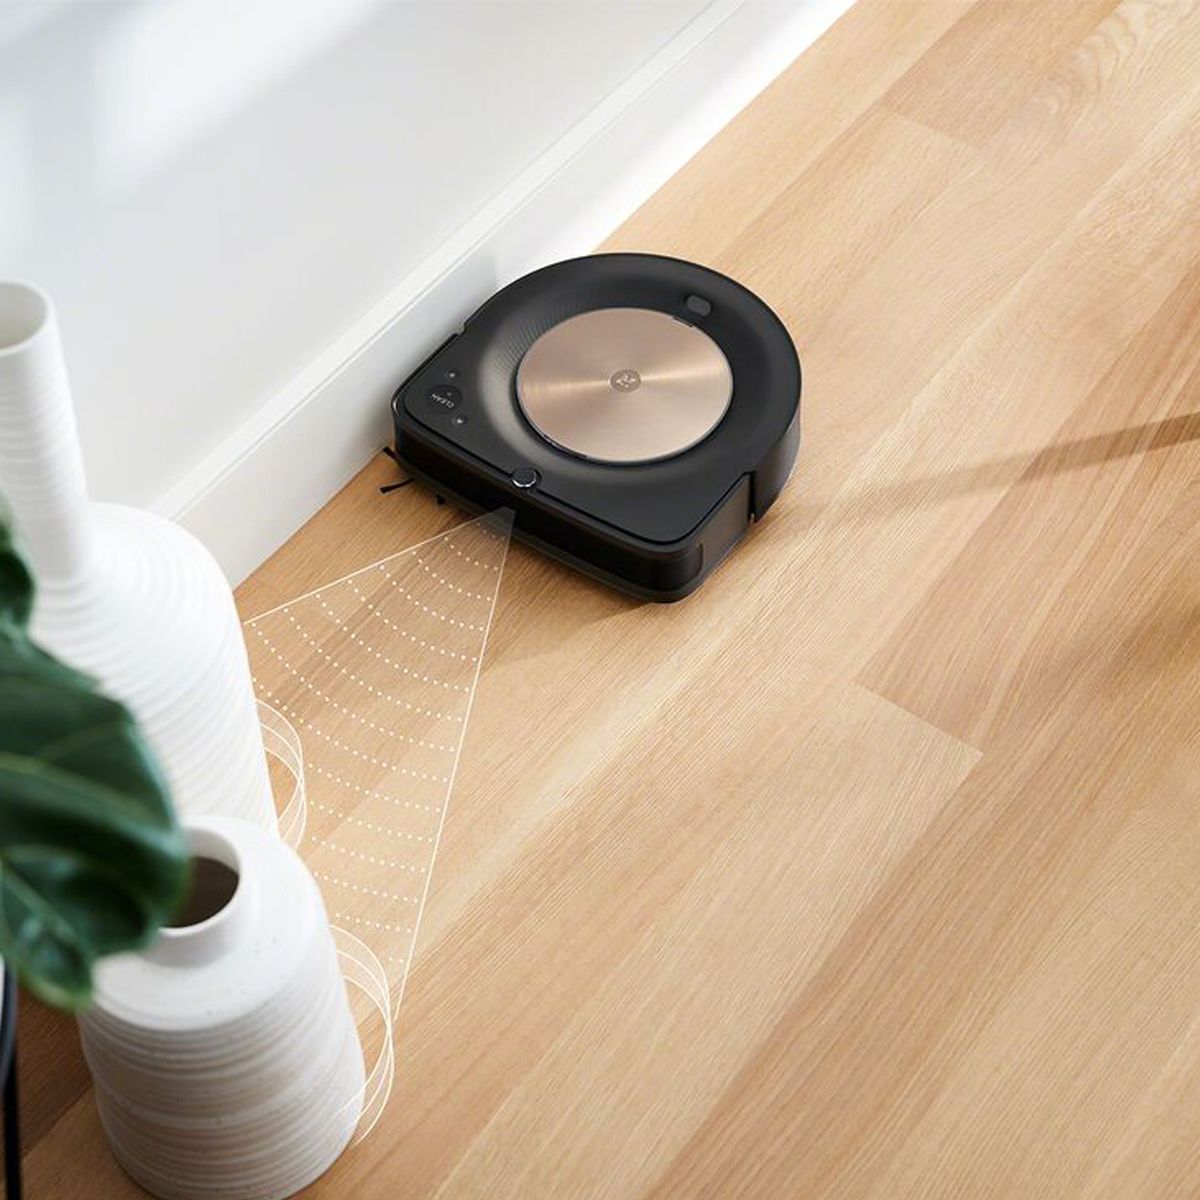 iRobot Roomba s9+ robot vacuum review: all you need to know